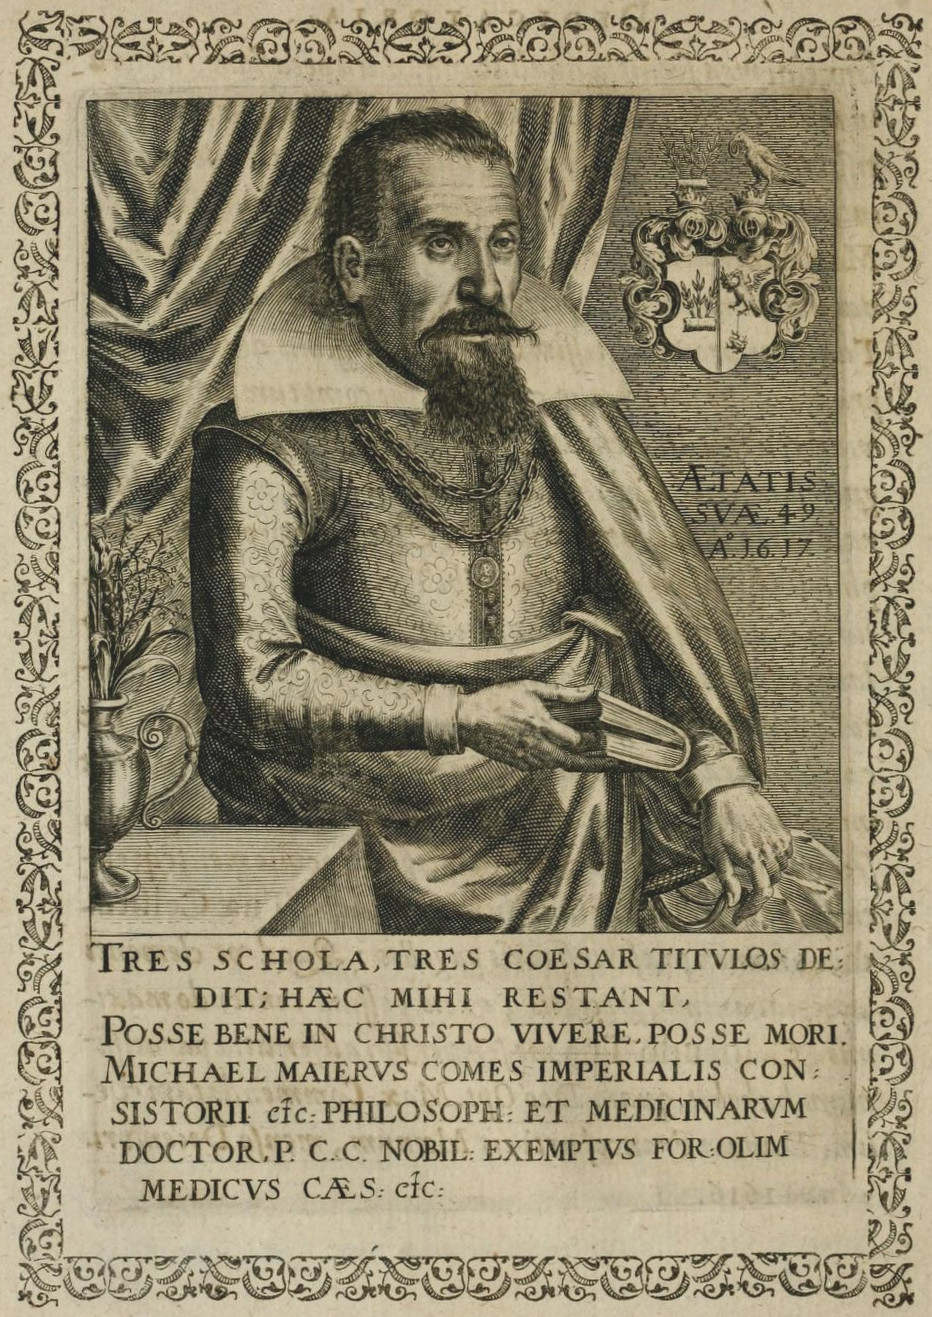 German physician and counselor to Habsburg emperor Rudolf II